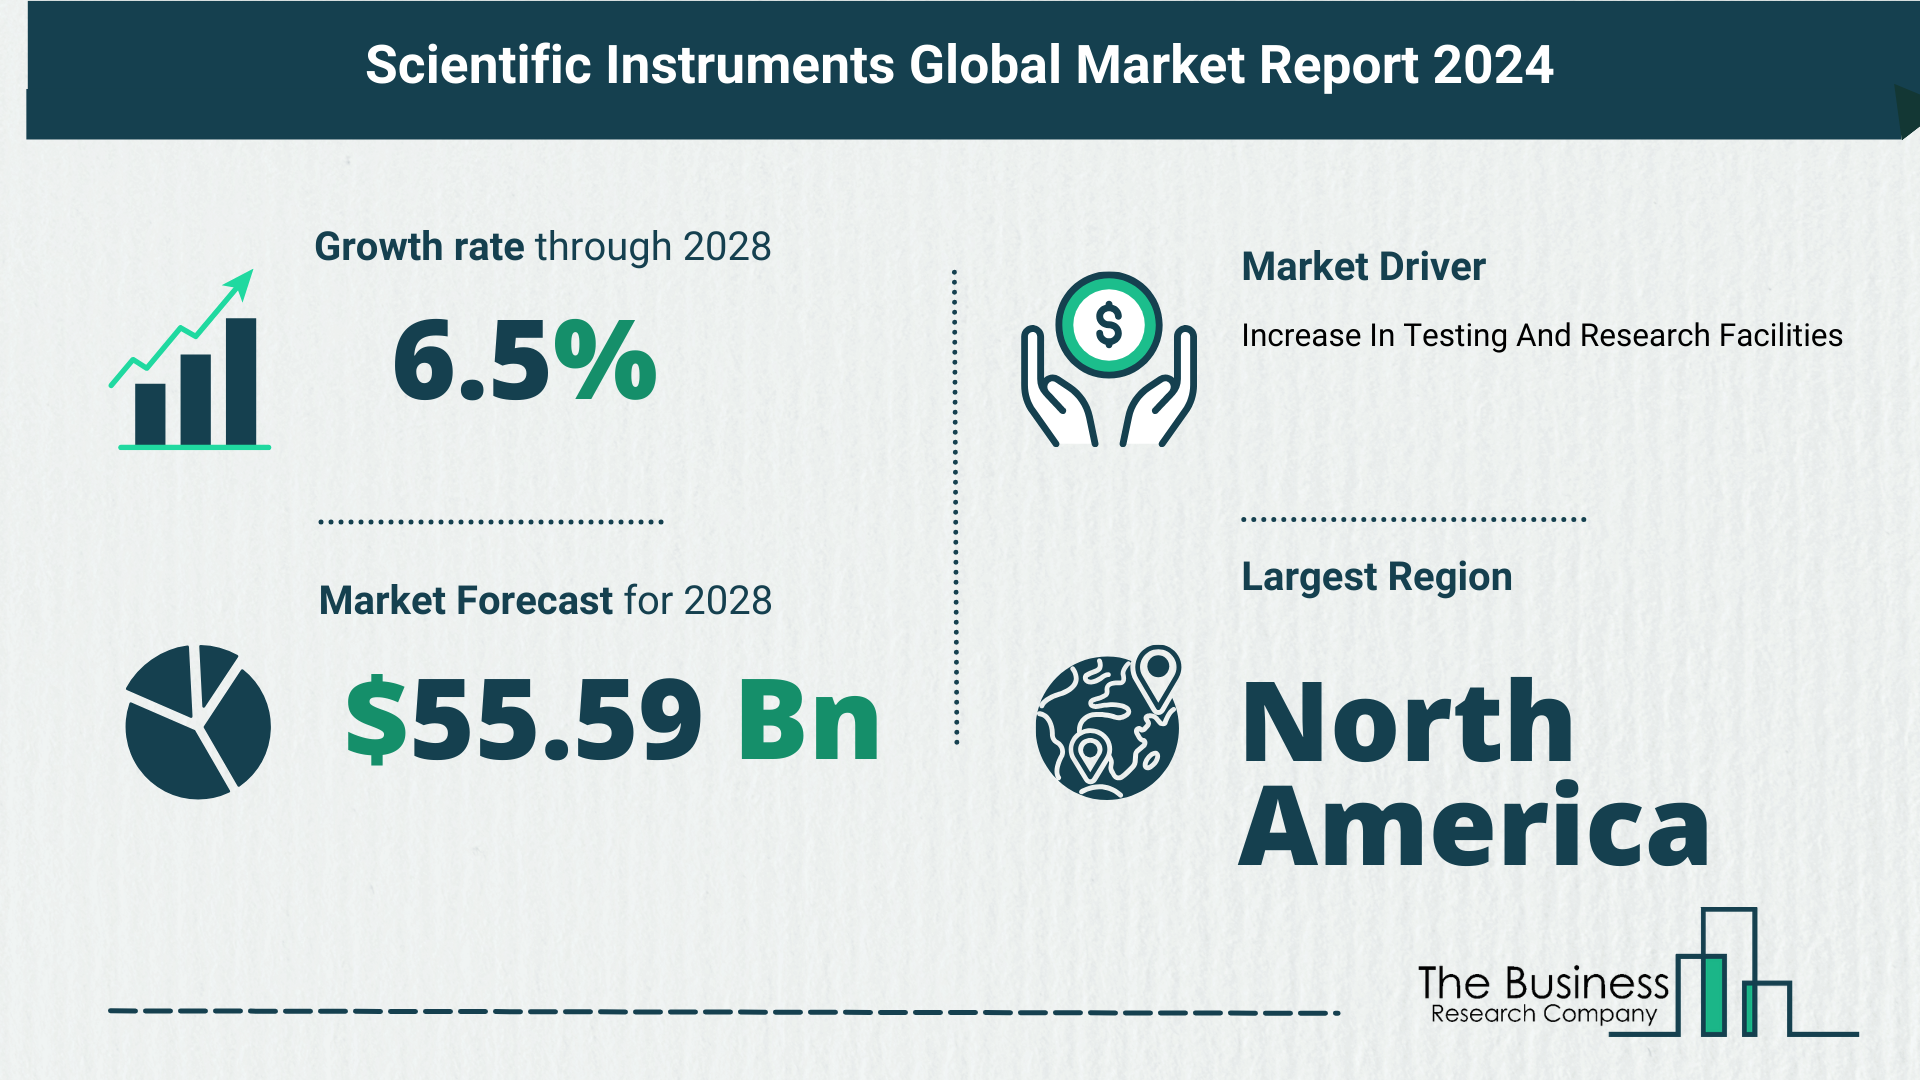 Key Trends And Drivers In The Scientific Instruments Market 2024